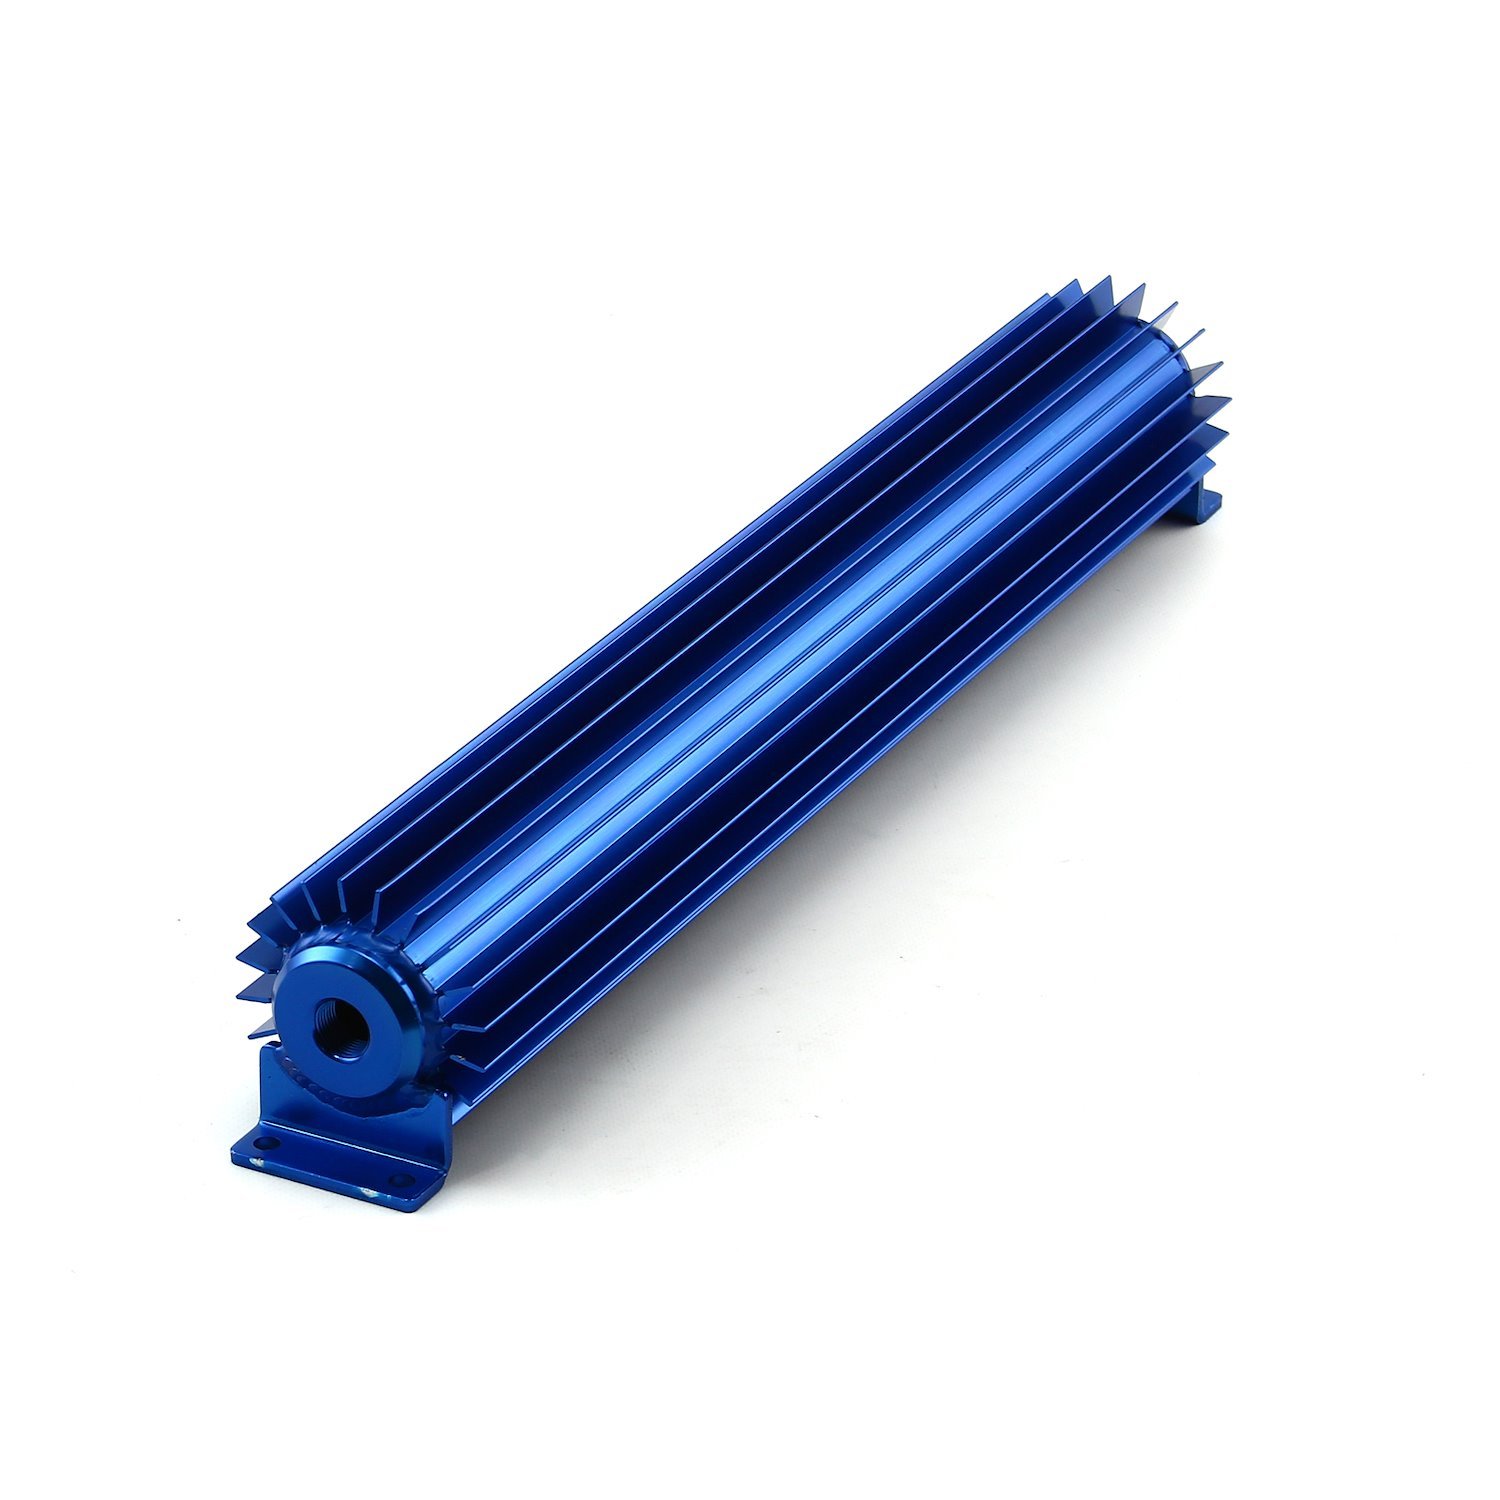 Single Pass Transmission Oil Cooler With 3/8" Hose Barb Fittings Overall: 3" H x 3.25" T x 18" W